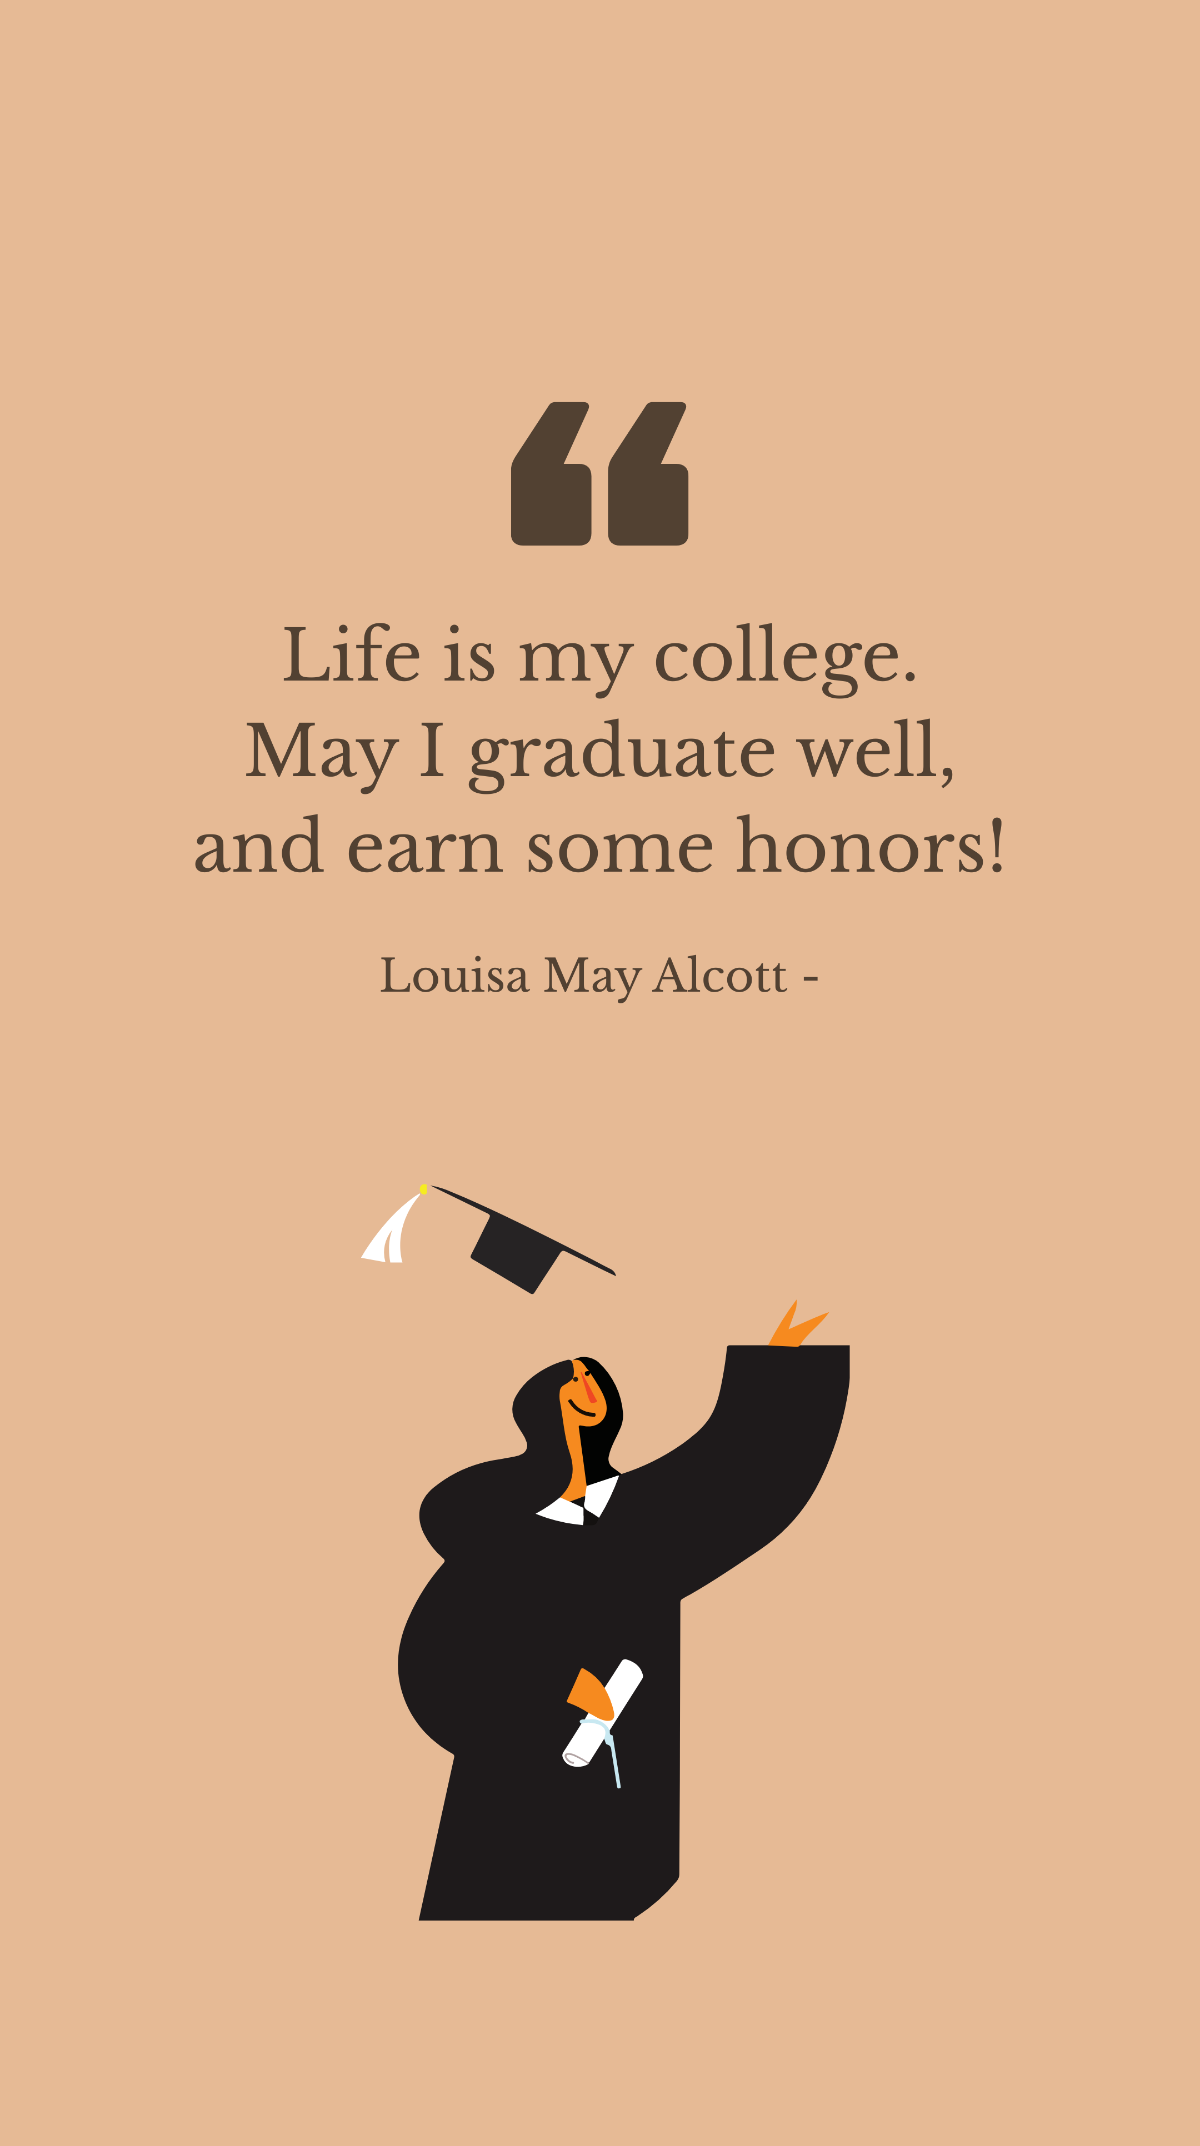 Free Louisa May Alcott - Life is my college. May I graduate well, and earn some honors! Template